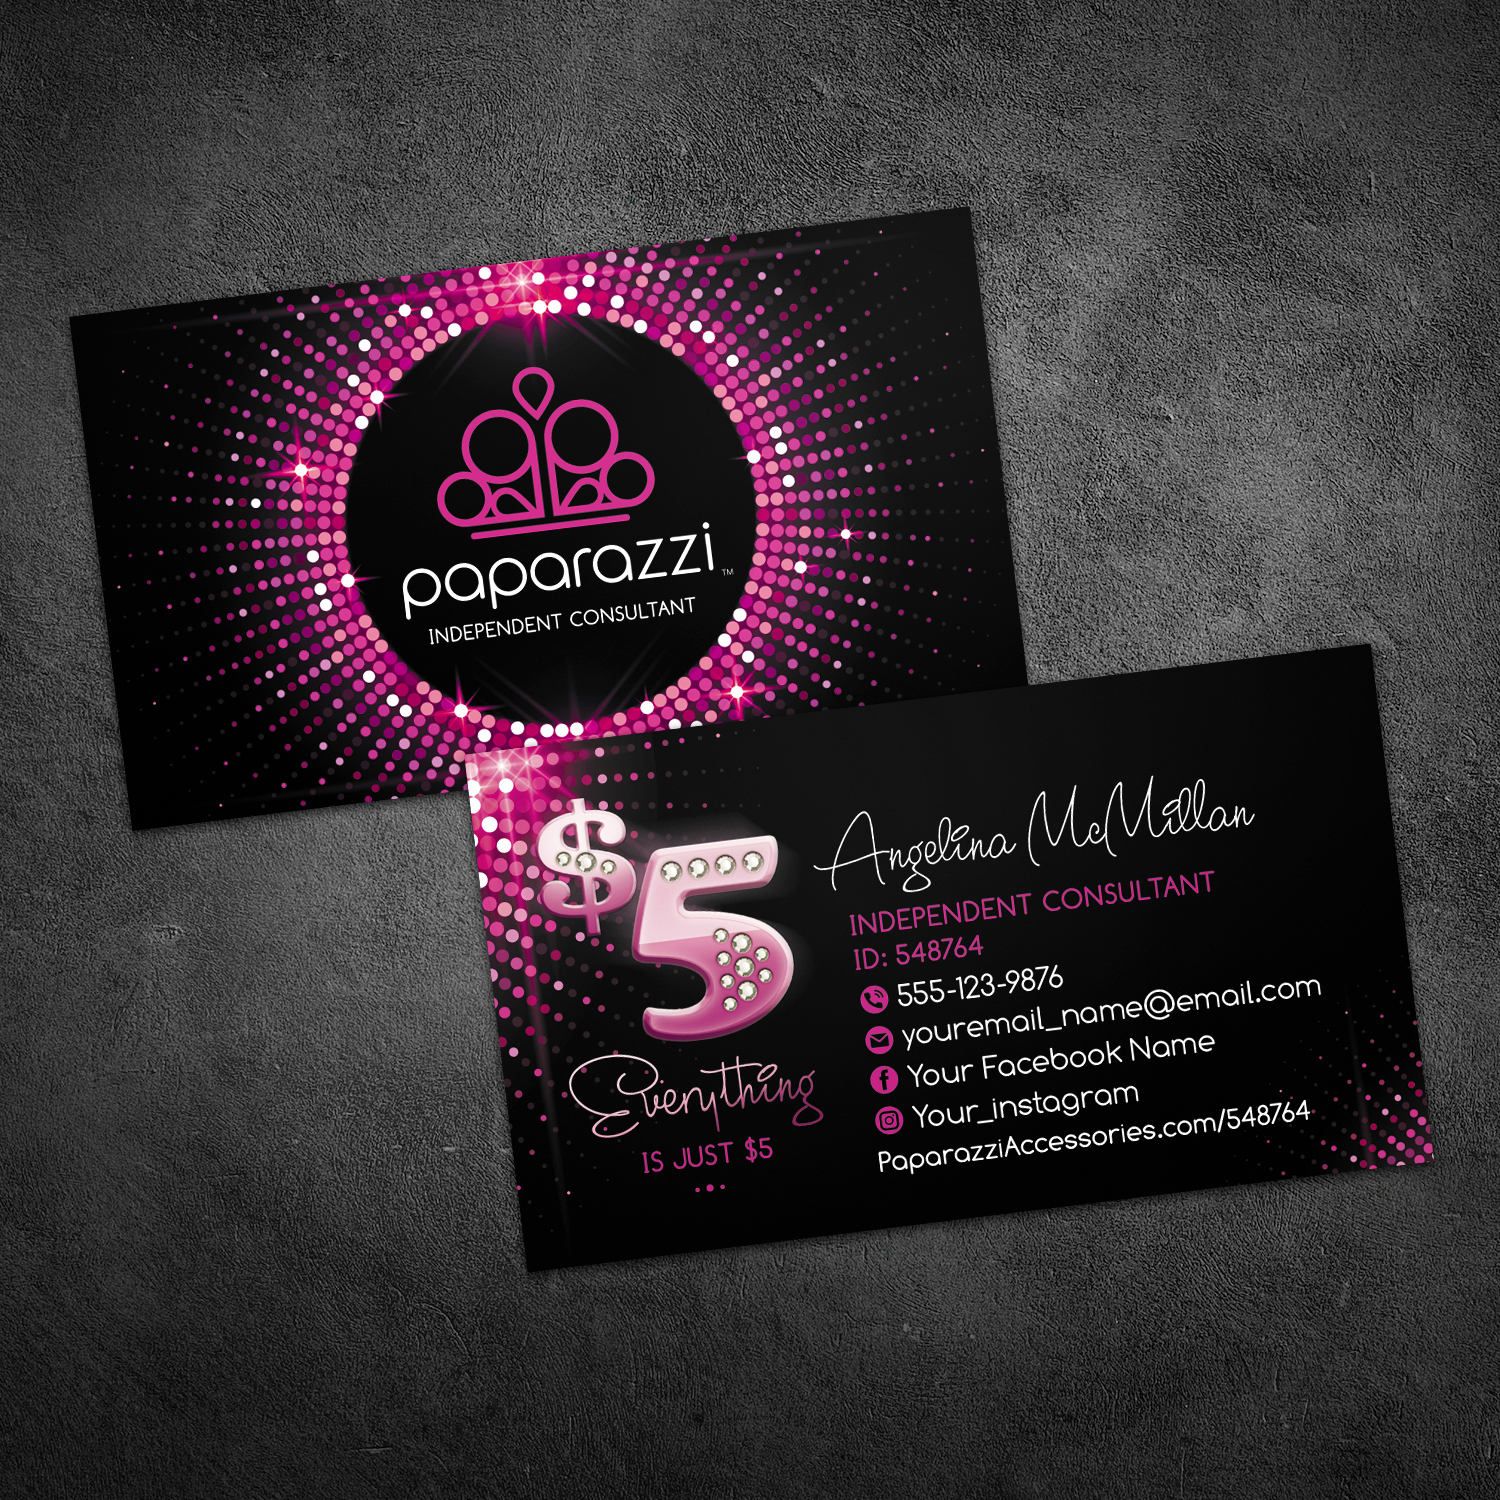 paparazzi business cards free 2